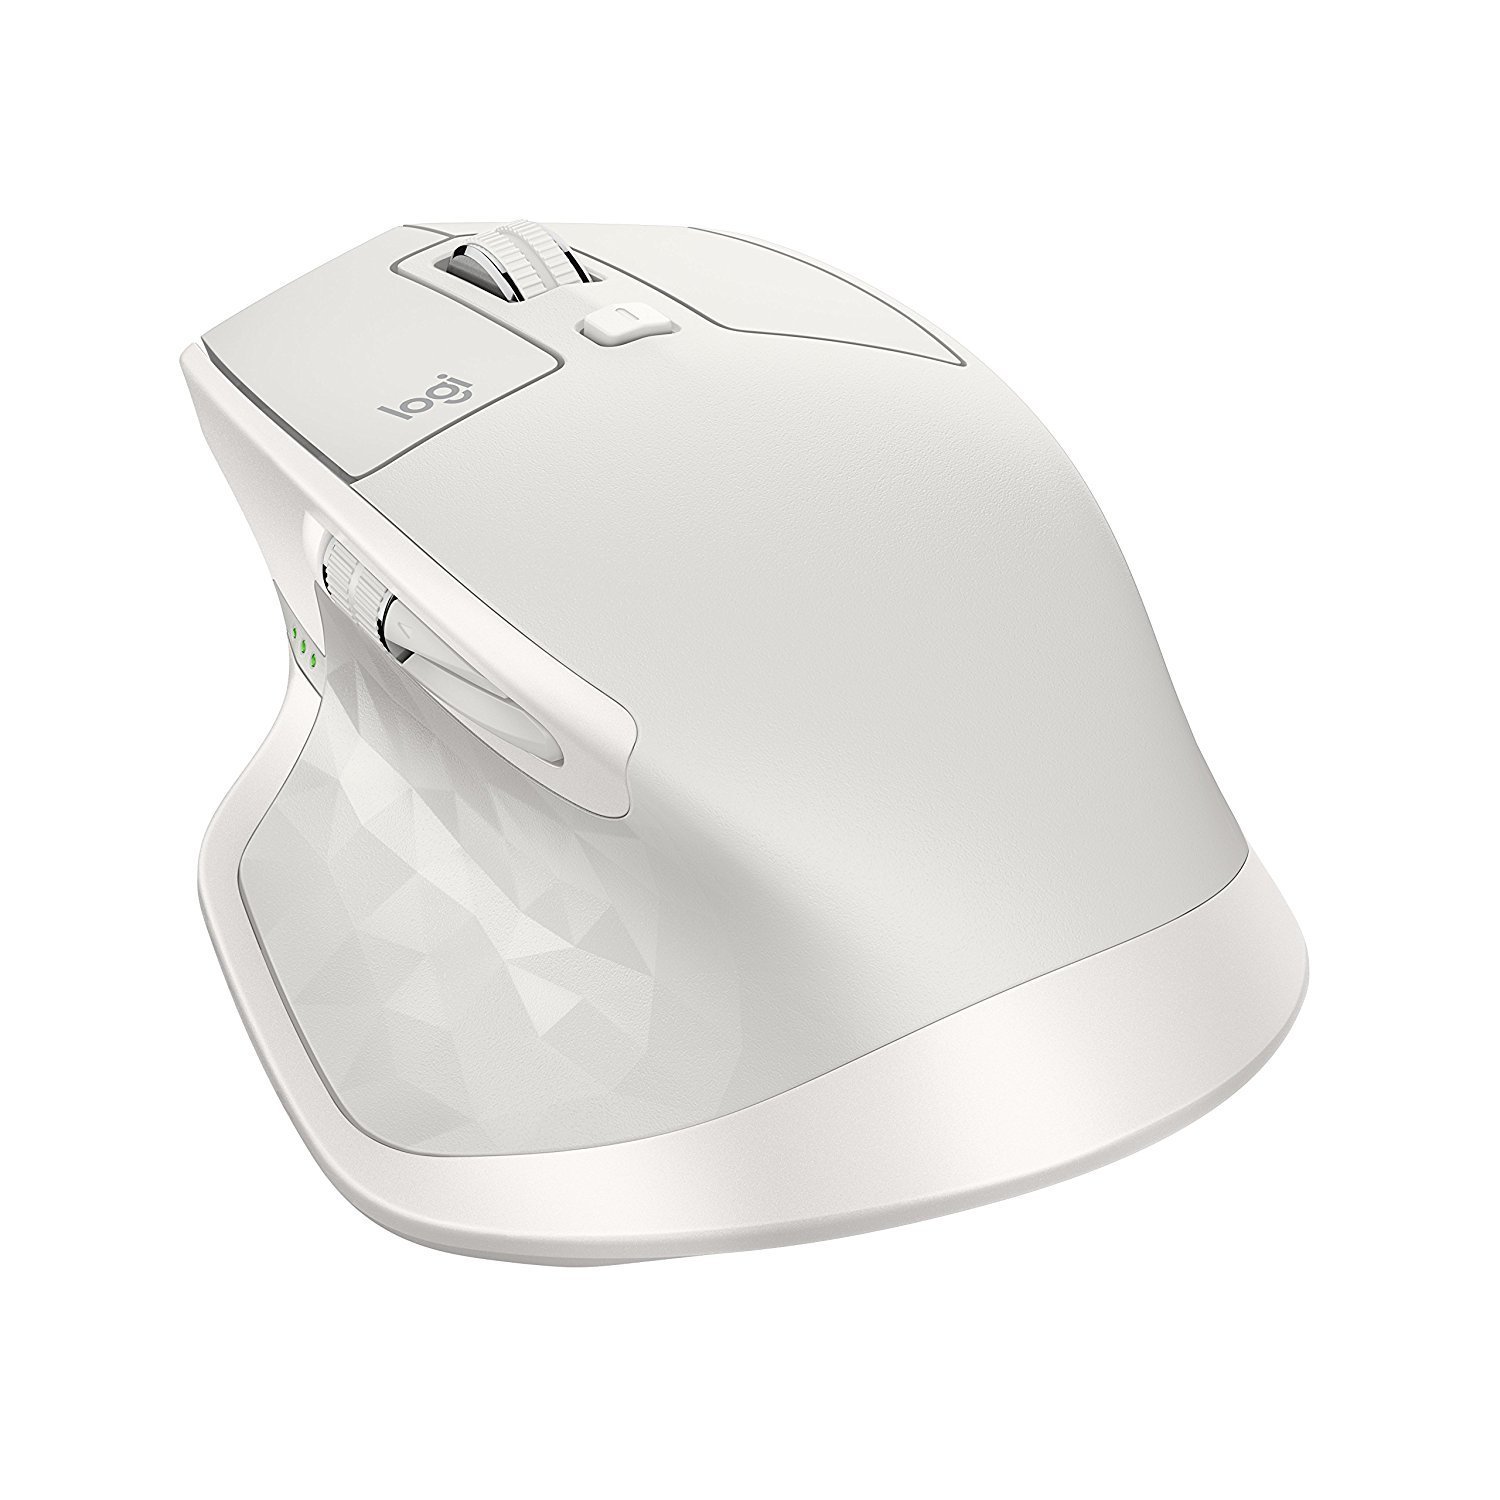 Best Mouse for MacBook Pro in 2022 Reviews